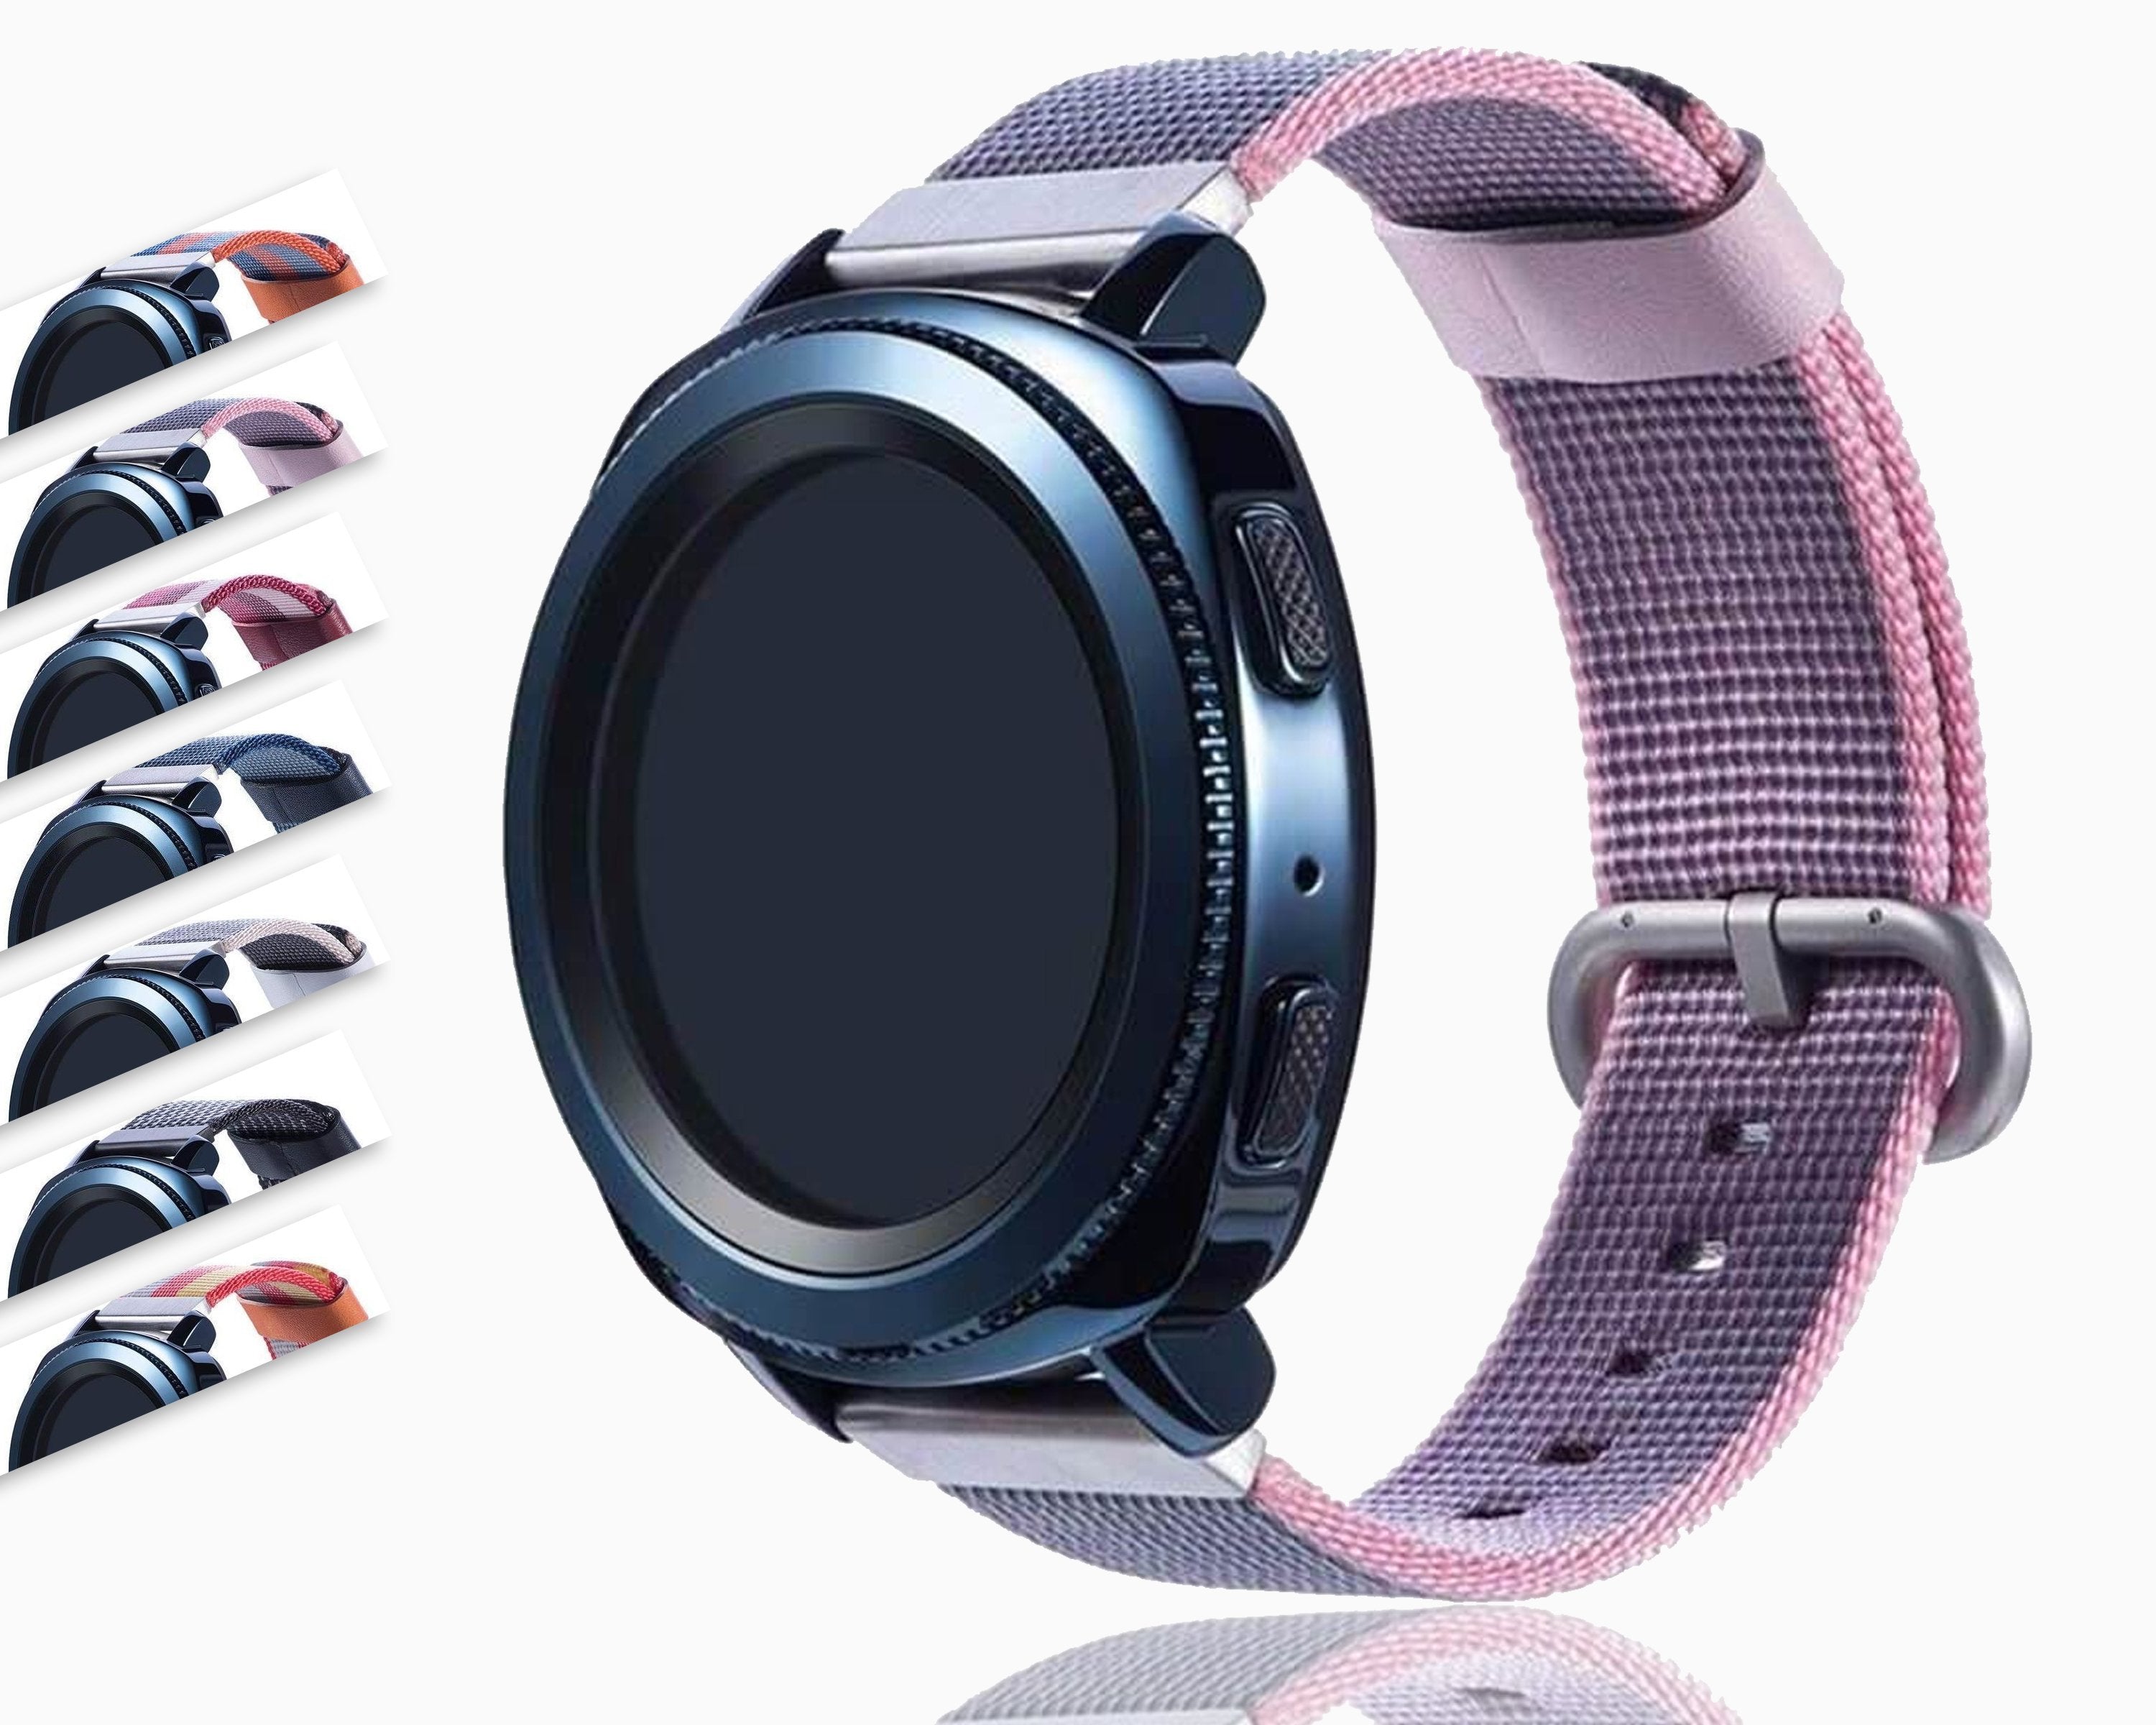 Stranden sneen udvikle Woven nylon band for Samsung Galaxy Watch 46mm 42mm Active 2 strap Mag –  www.Nuroco.com